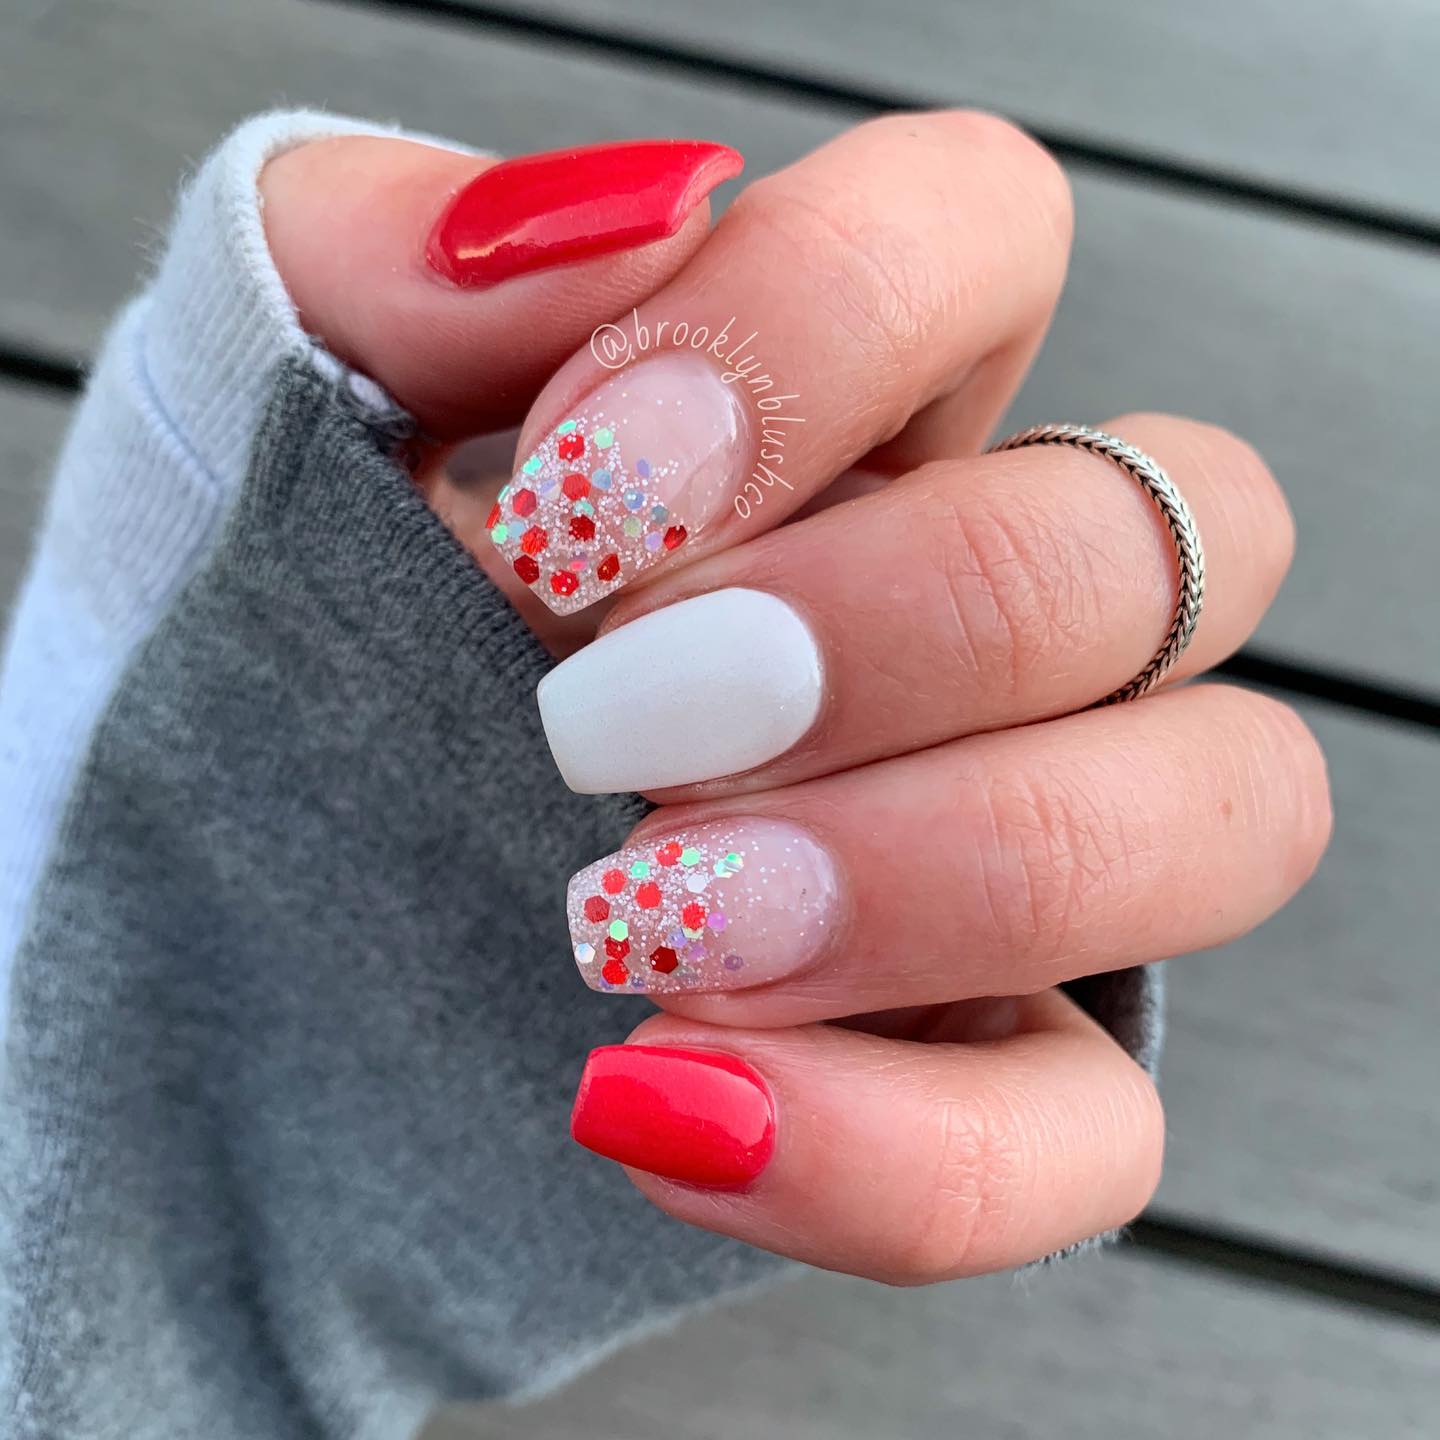 red and white nails design